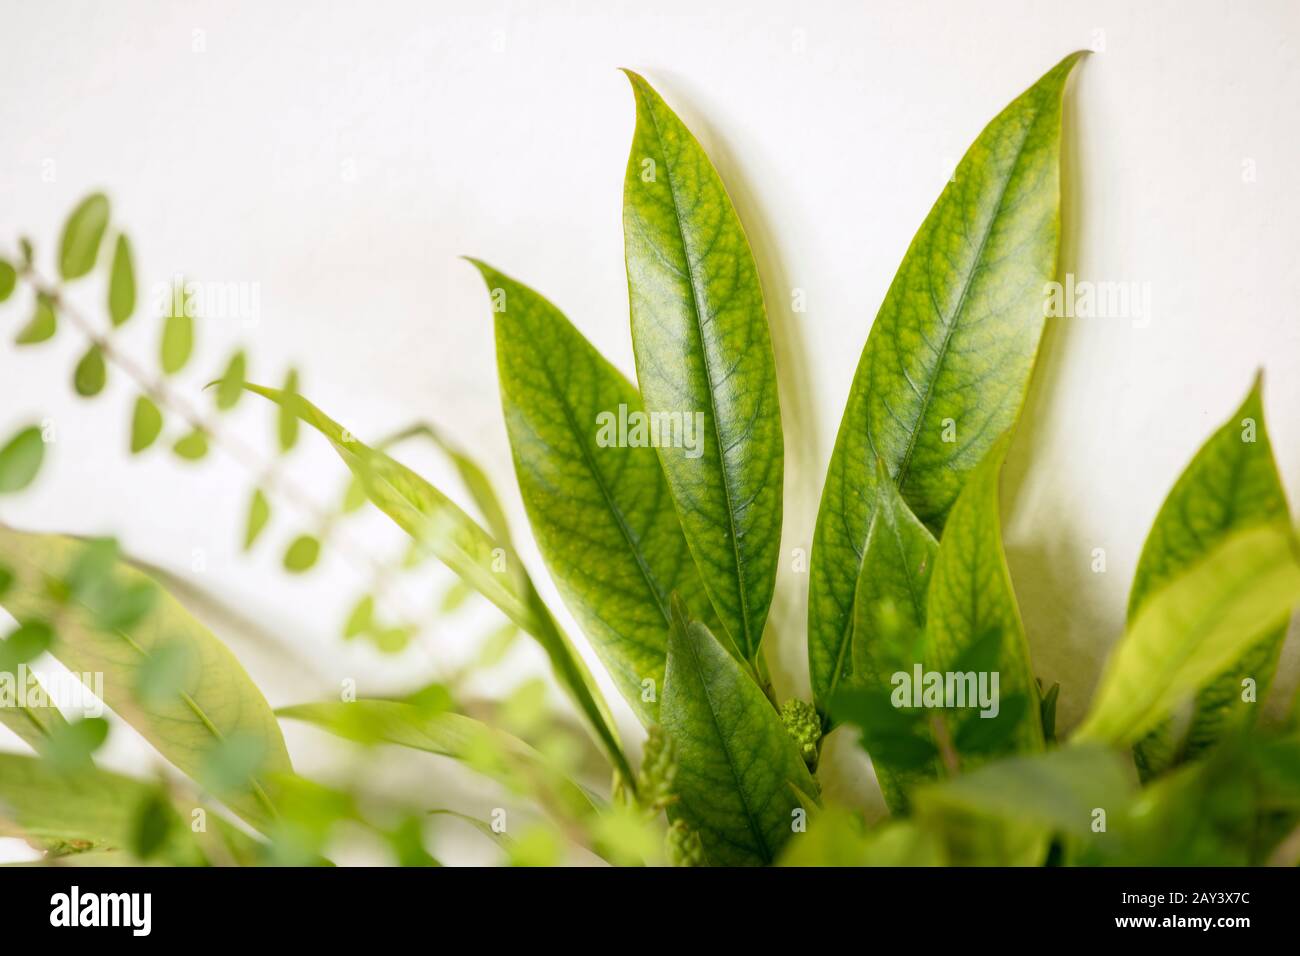 Close up of fresh light green leaves on white background, abstract composition. Foliage background. Stock Photo